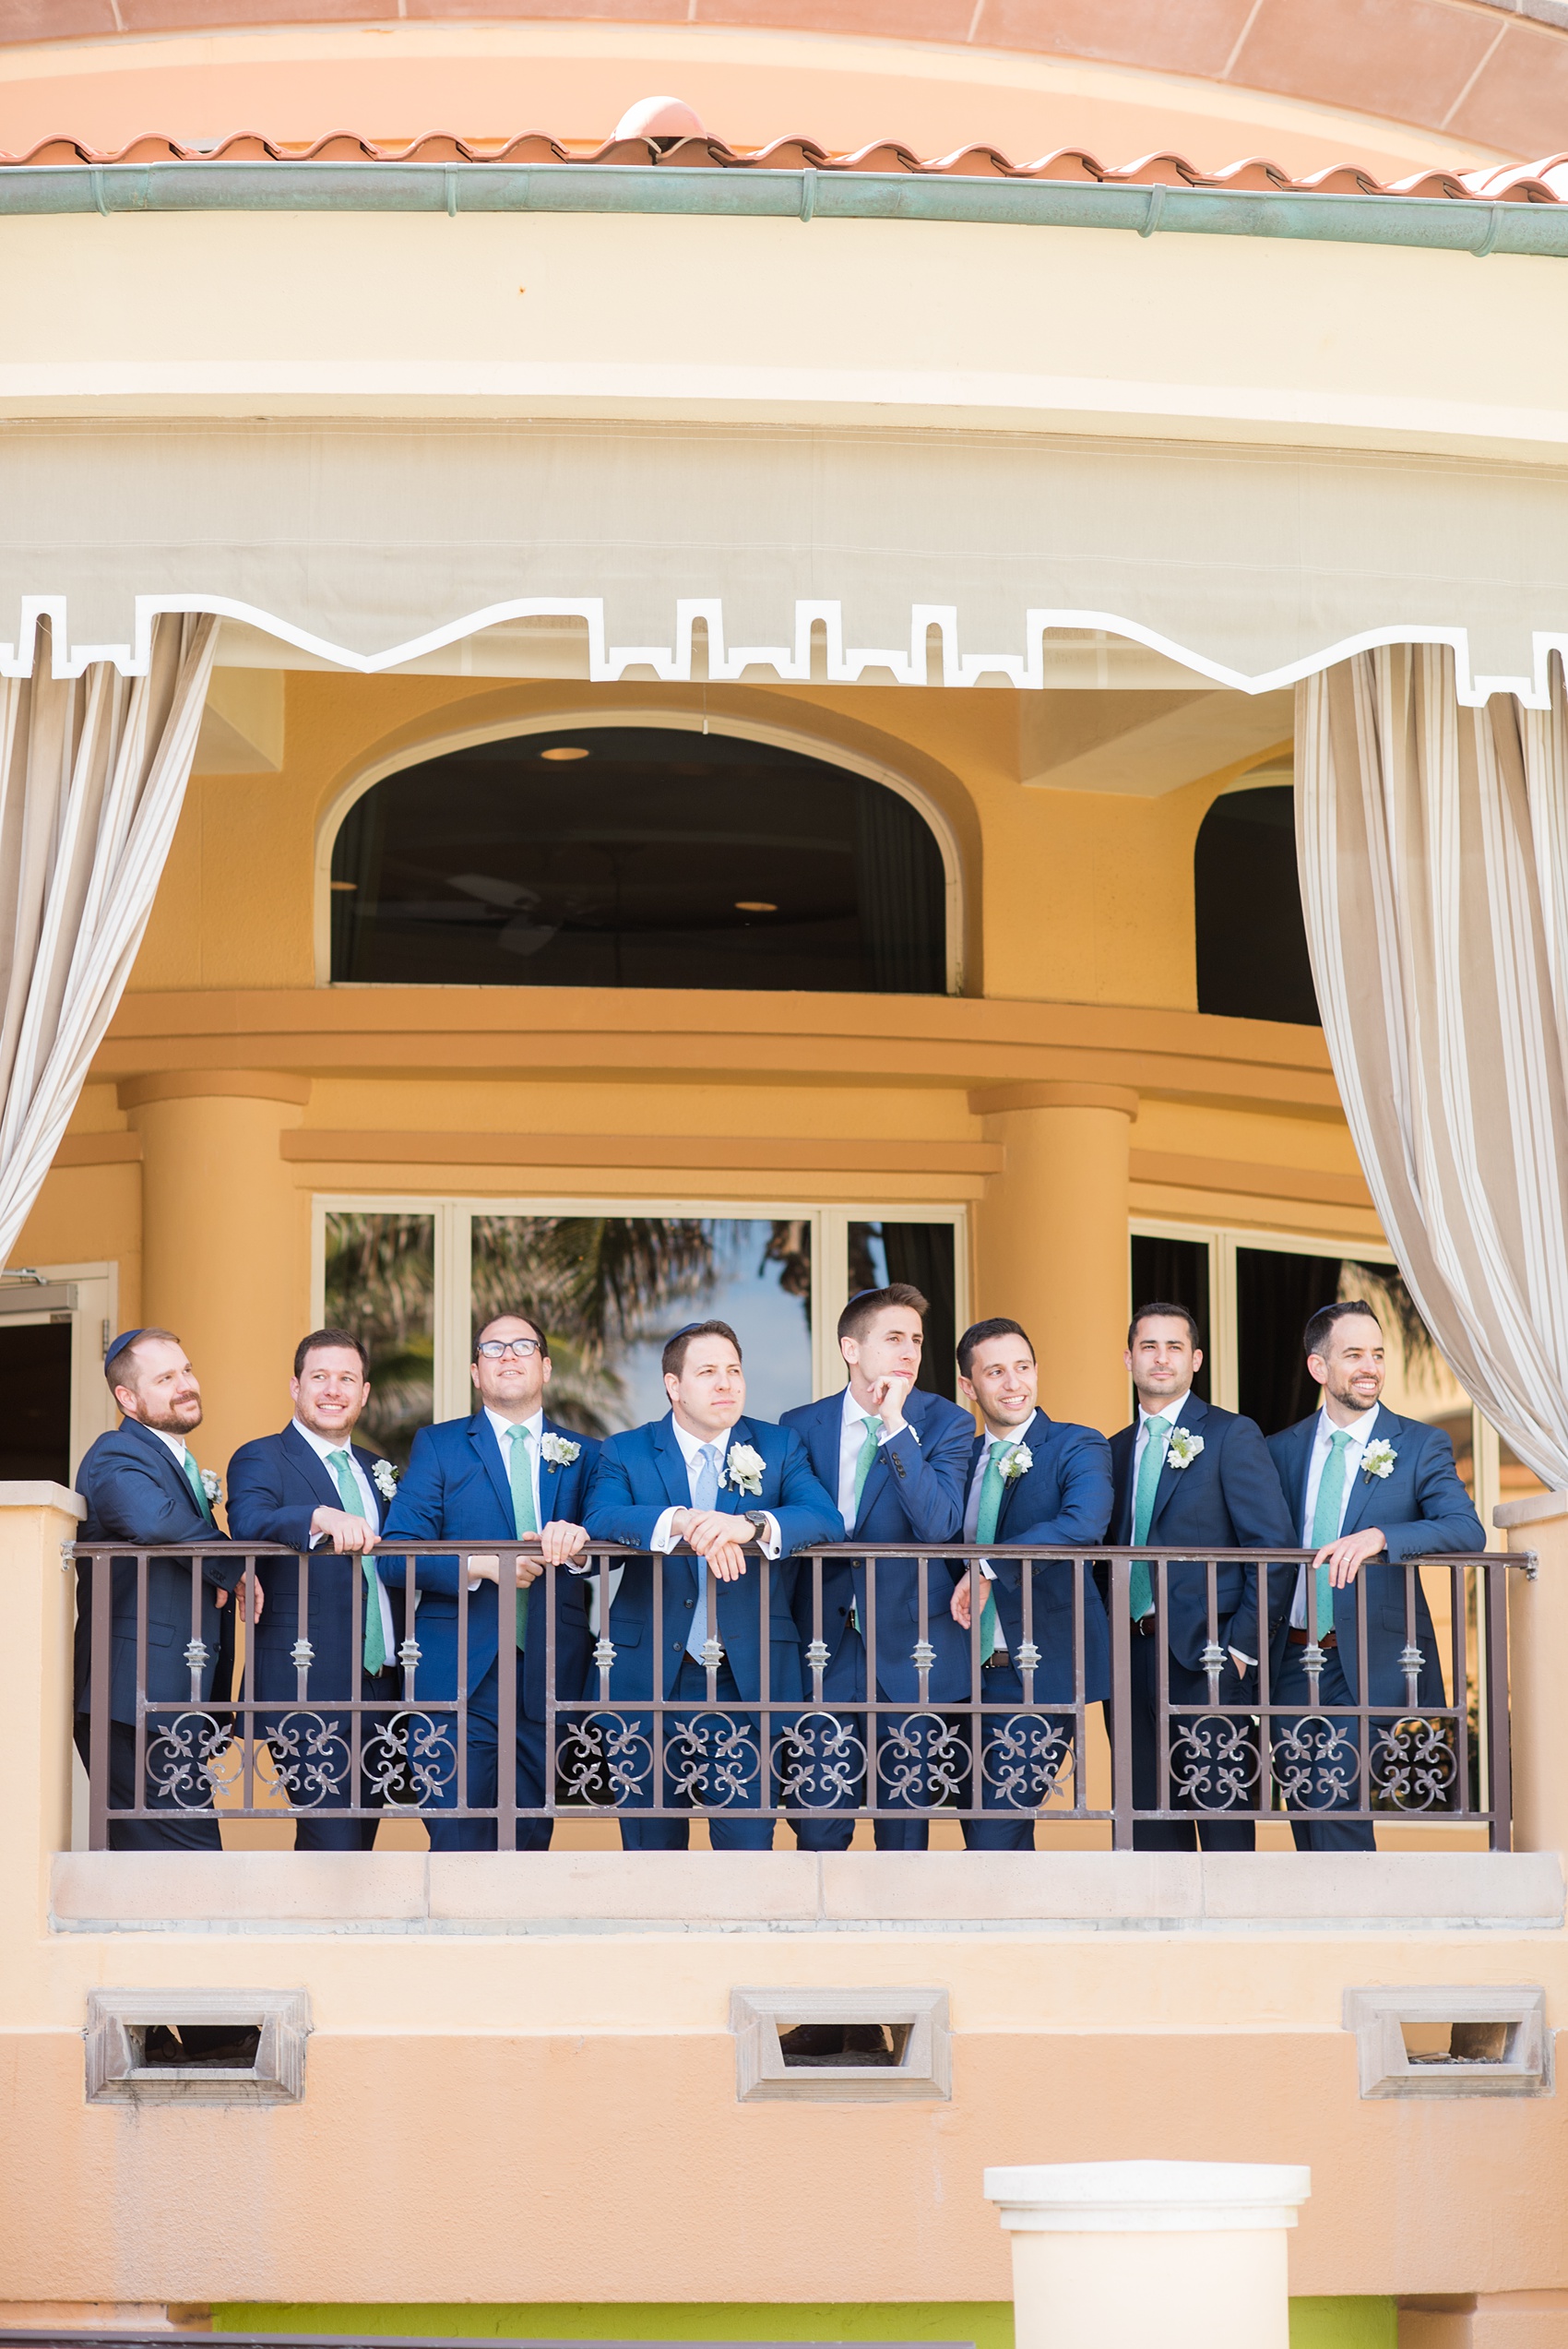 Eau Palm Beach wedding photos by destination photographer, Mikkel Paige. This luxury Florida hotel is a beautiful location for a destination wedding. The bridesmaids wore different types of seafoam/mint green chiffon gowns and groomsmen wore navy blue suits. Click through to see more! #WestPalmBeach #EauPalmBeach #BeachWedding #FloridaWeddings #BeachBride